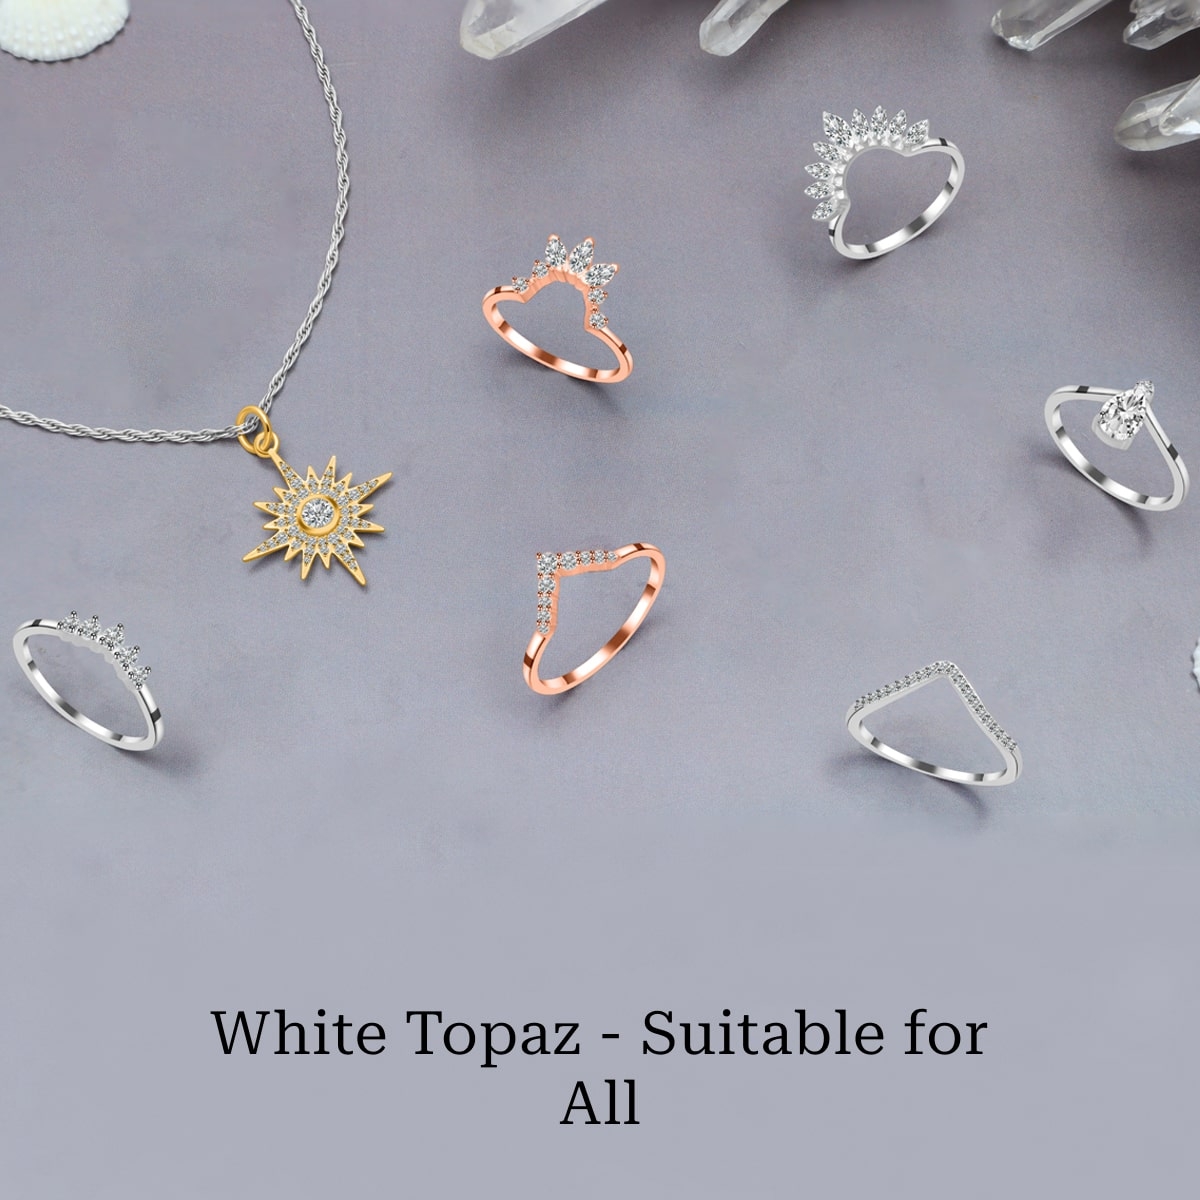 Who Can Wear White Topaz Stone